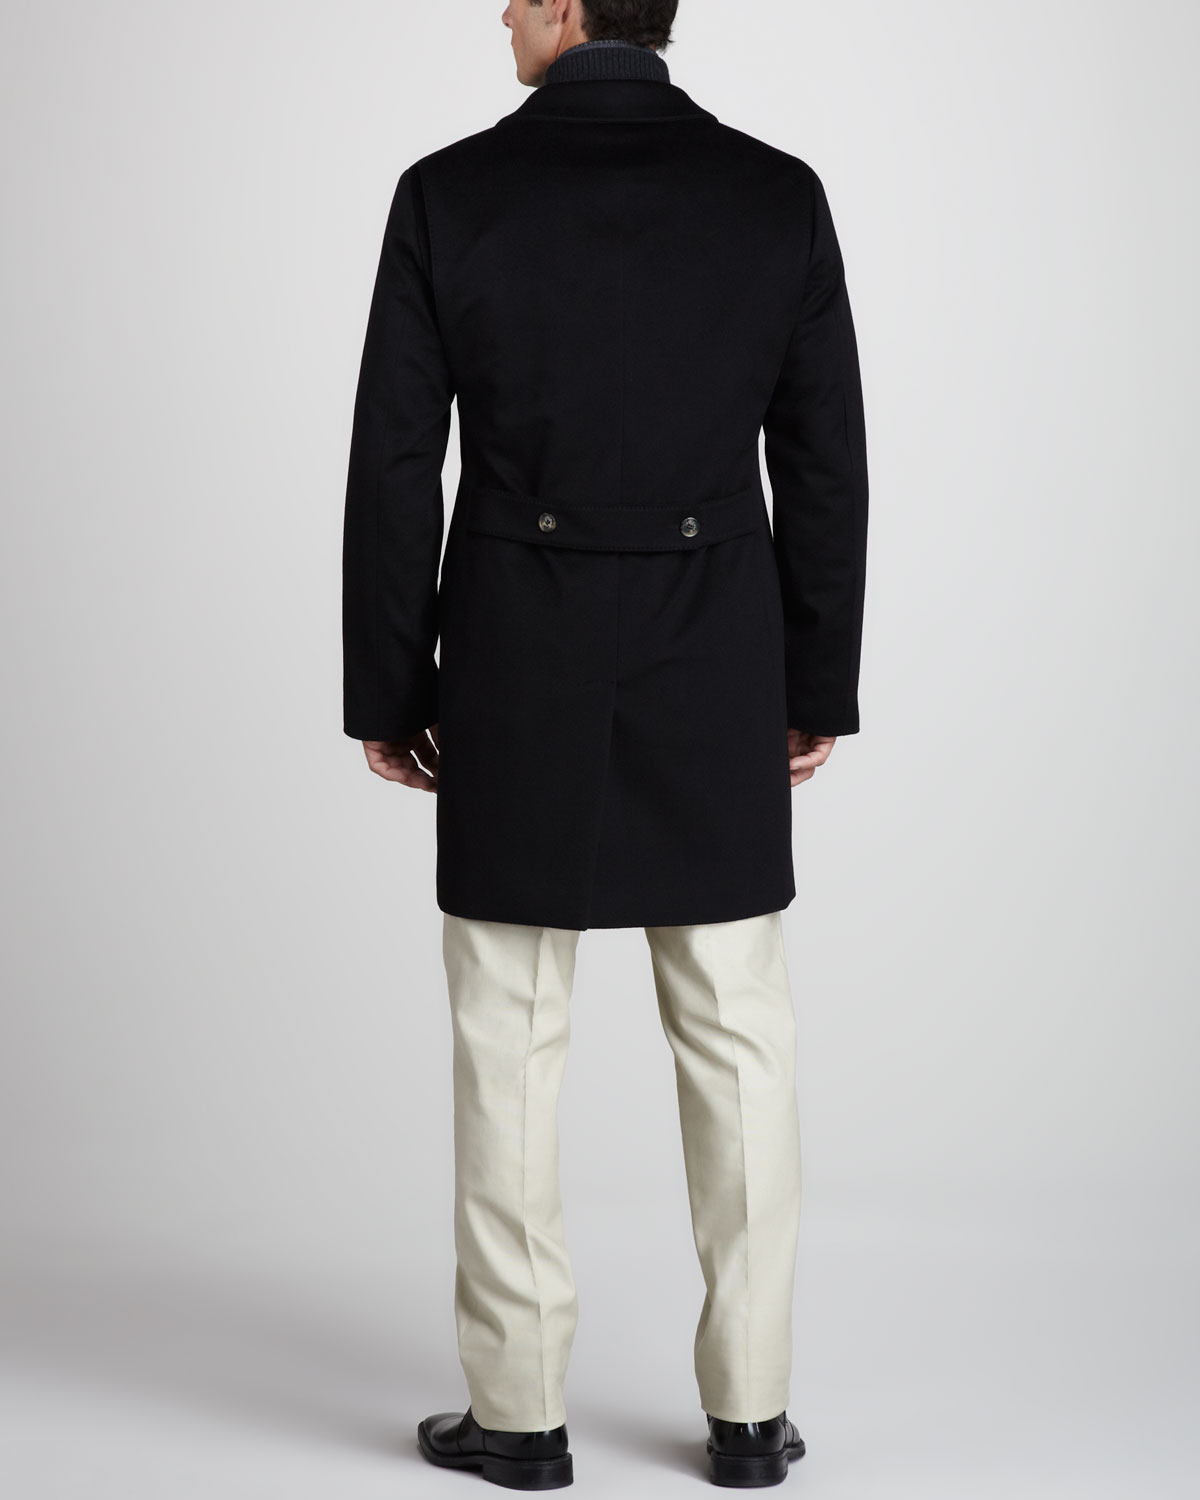 Lyst - Loro Piana Martingala Storm System Cashmere Coat in Blue for Men